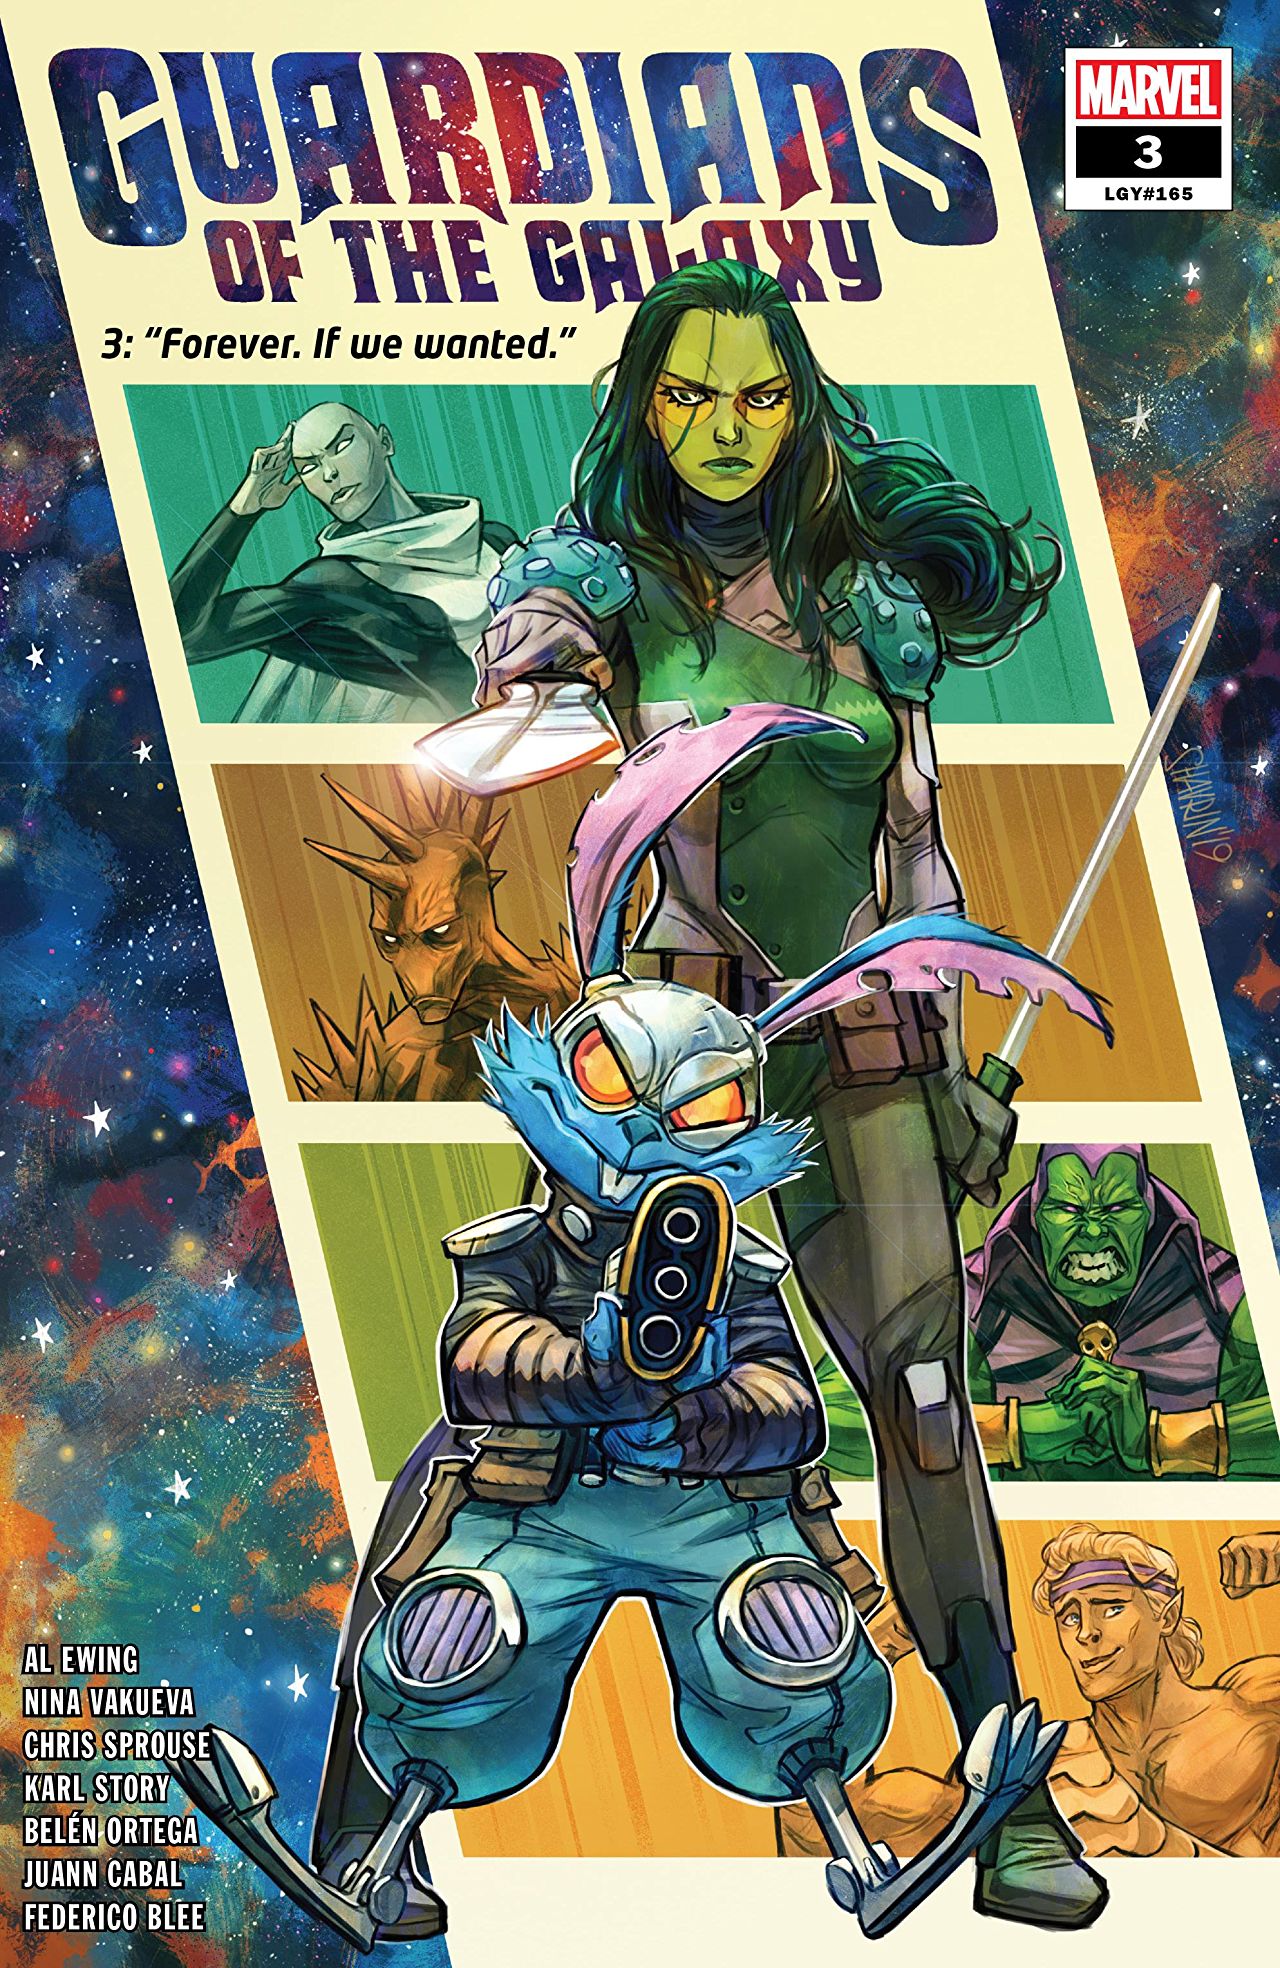 GUARDIANS OF THE GALAXY #3 1:100 McGUINNESS VARIANT COVER! 9.2